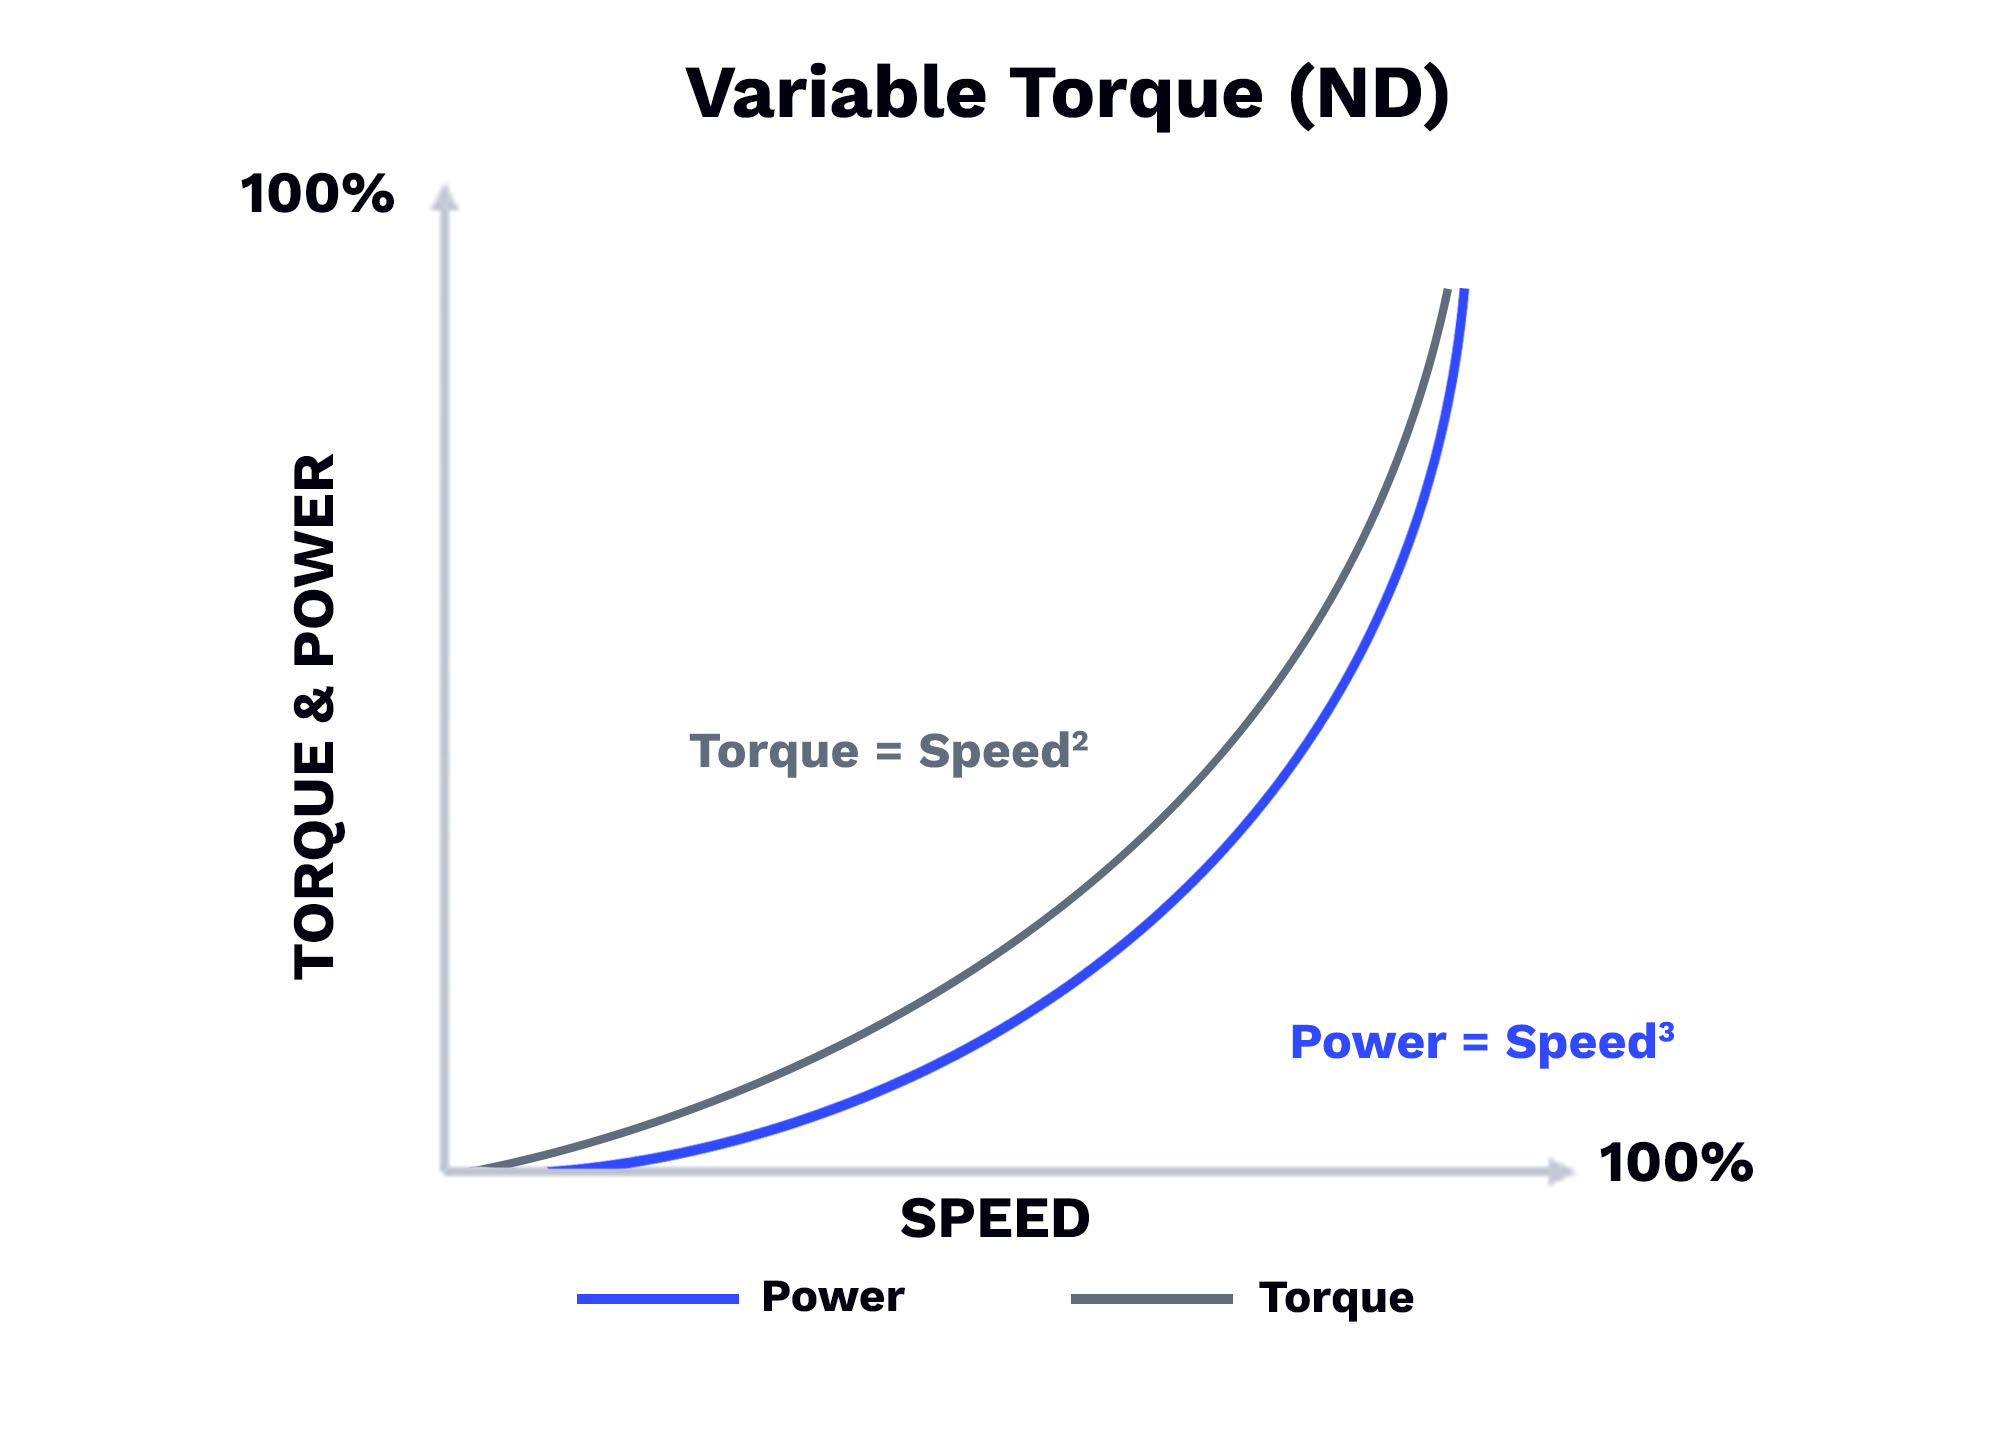 Solved The torque versus speed characteristic of a 60 Hz, 8